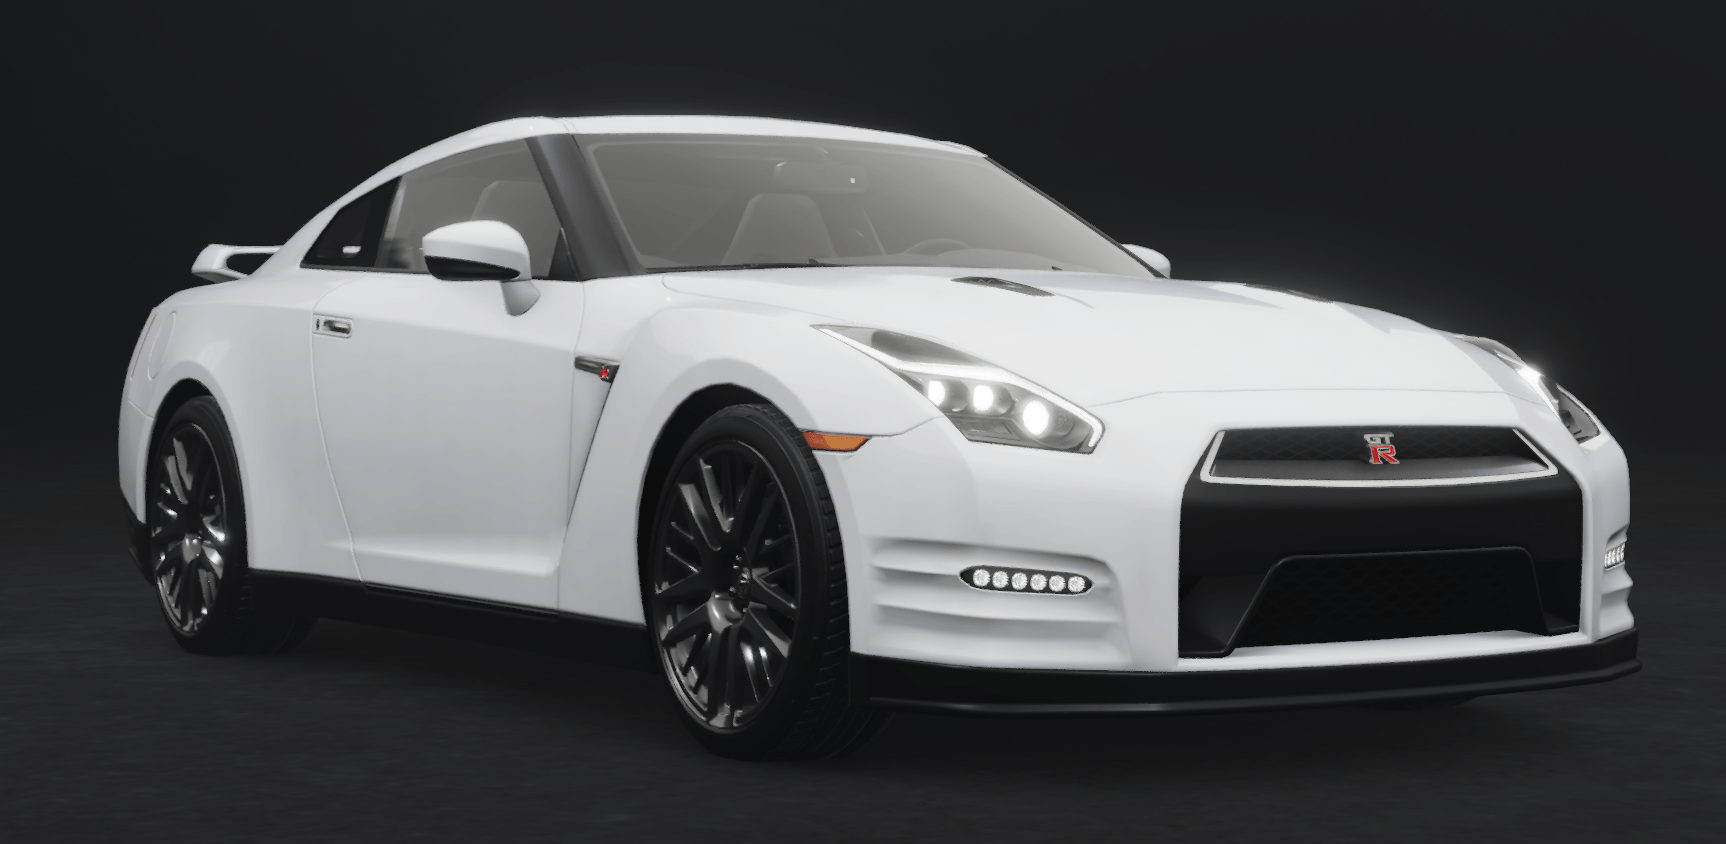 Category:Nissan GT-R - Wikimedia Commons